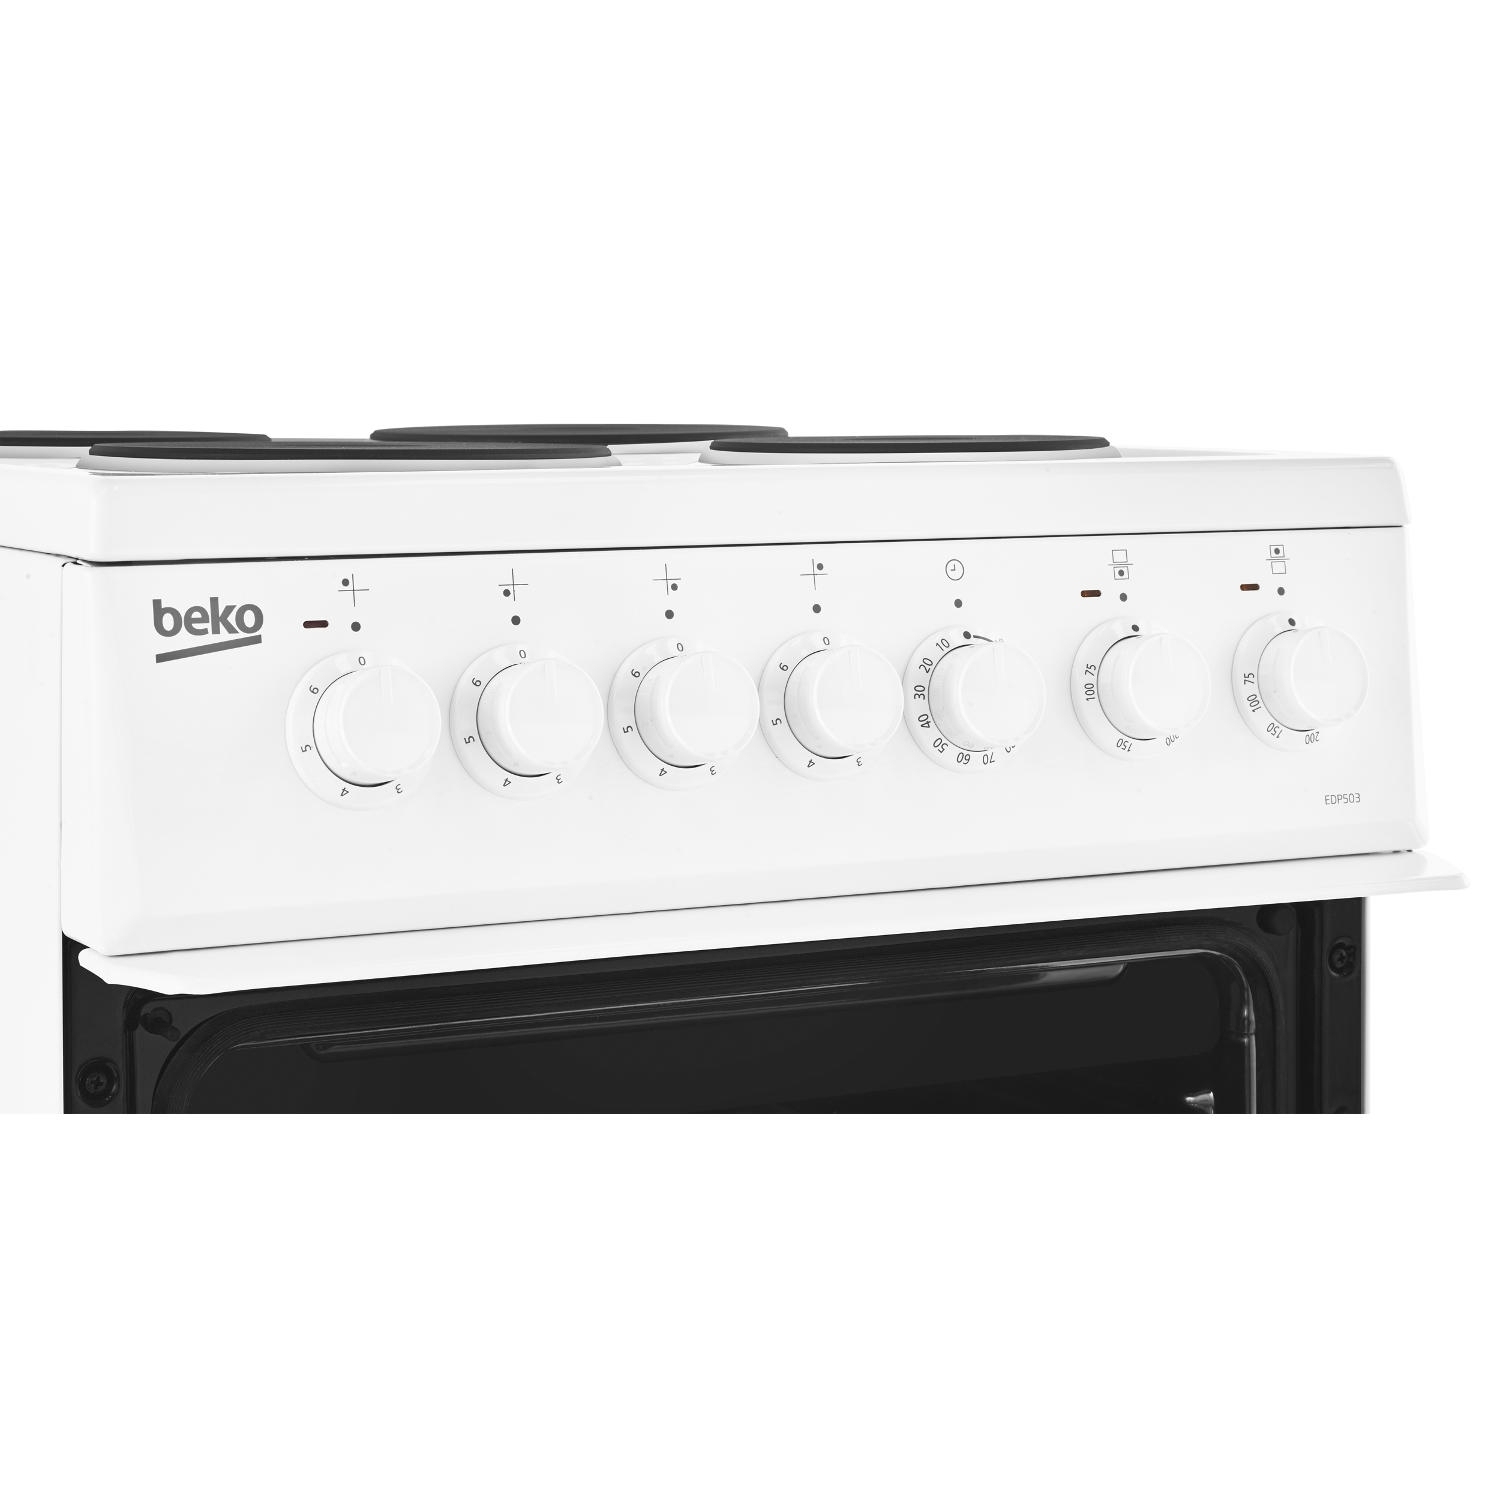 Beko EDP503W 50cm Electric Double Oven with Grill Cooker - White - 4